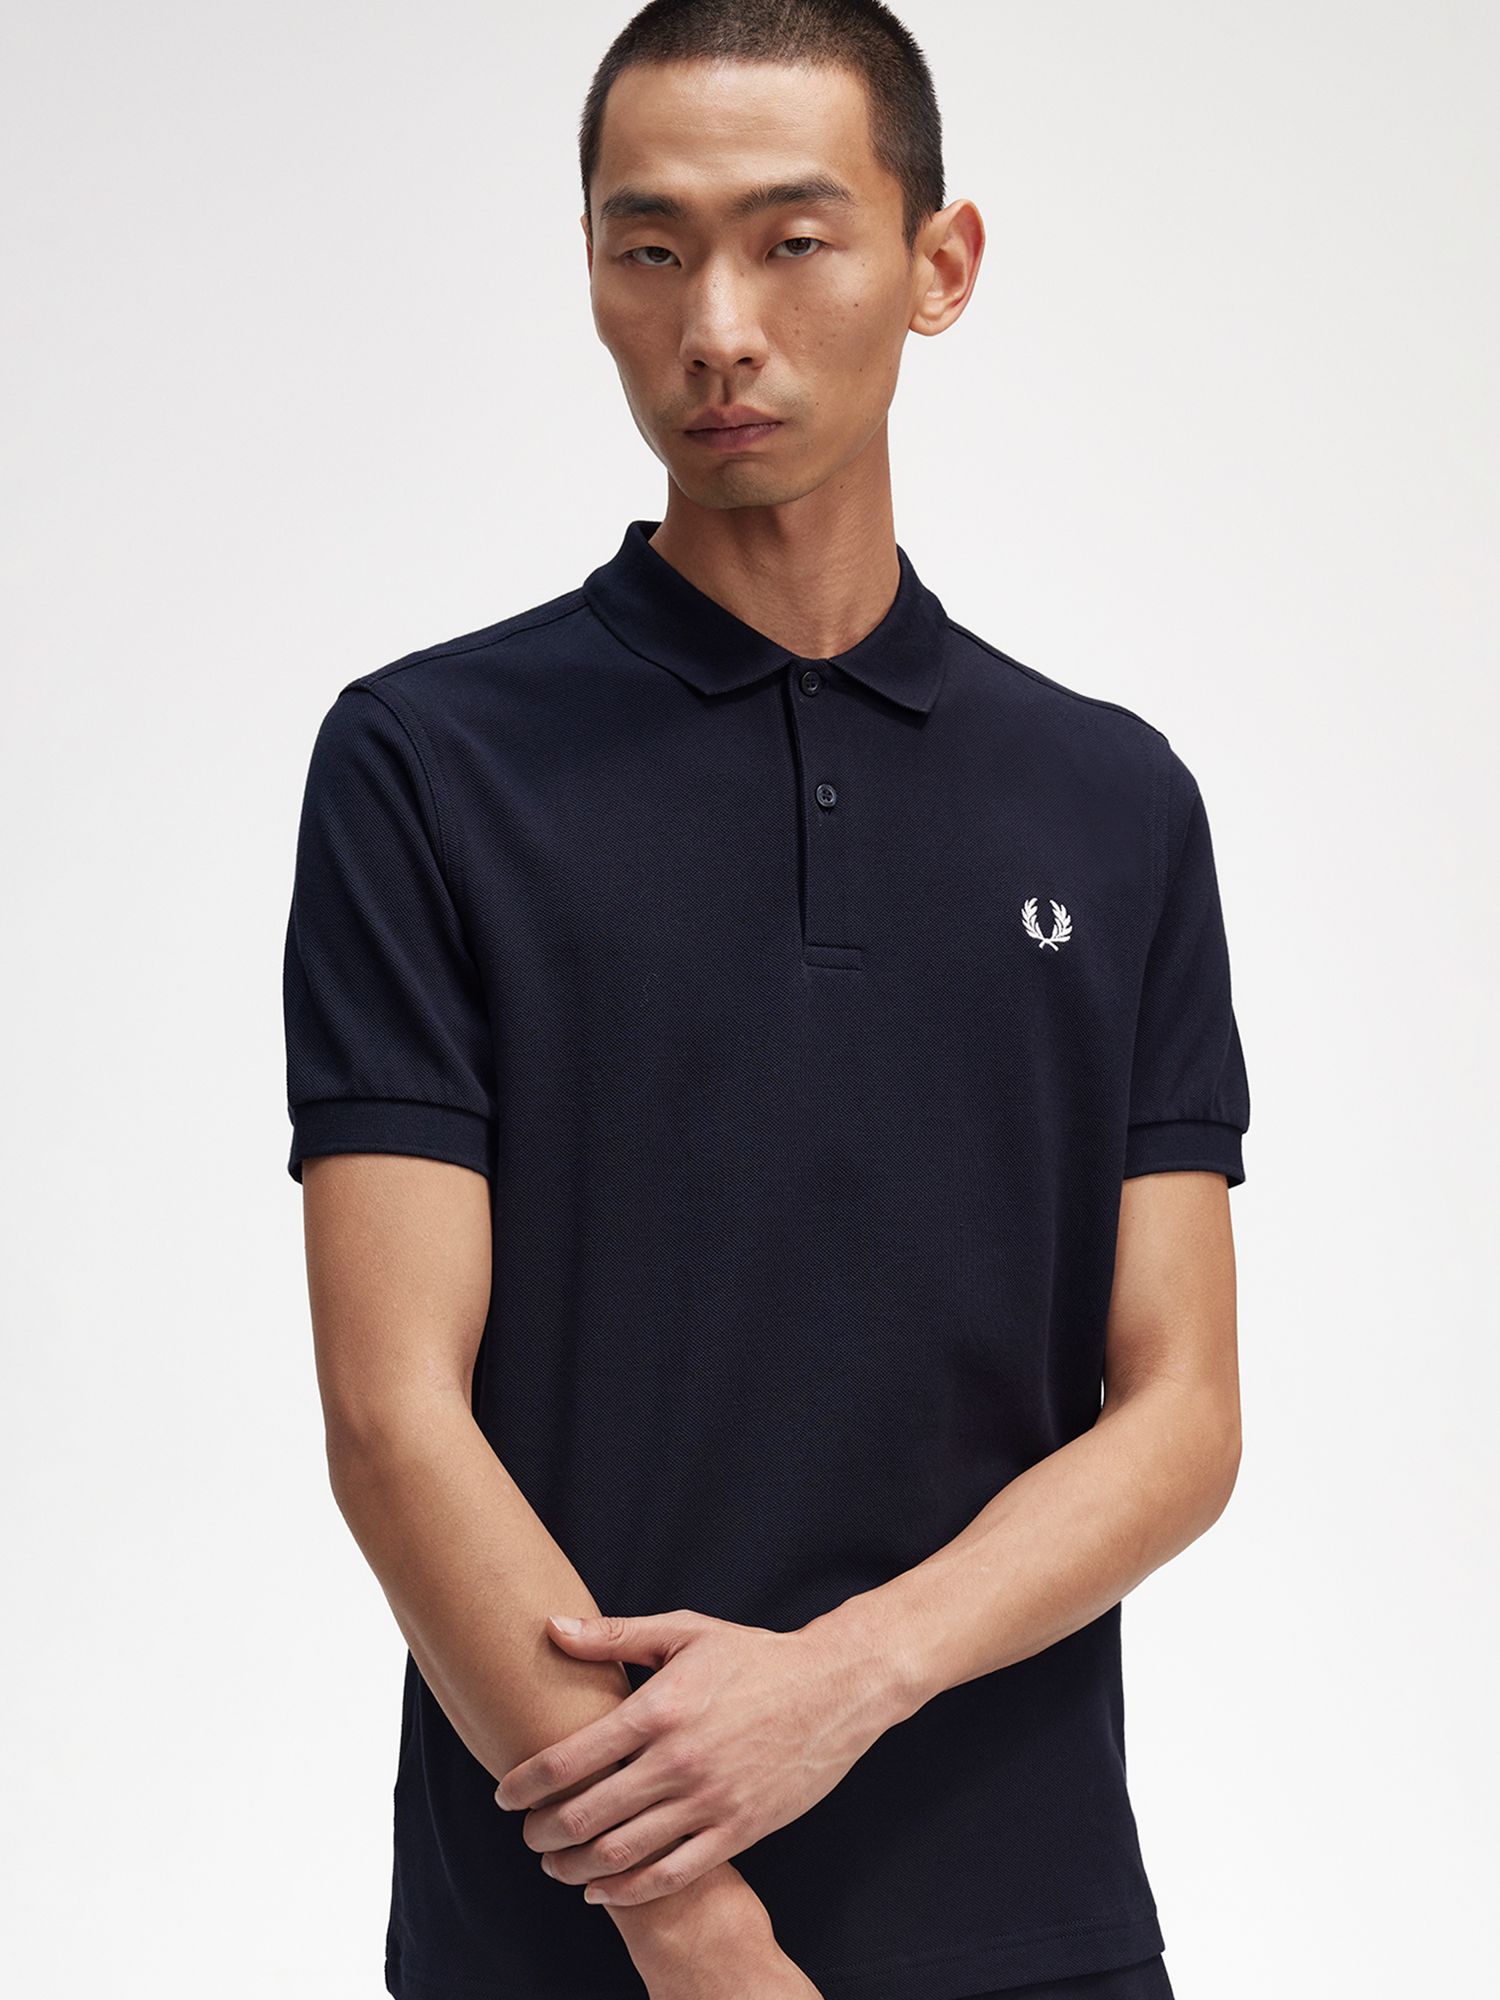 Fred Perry Plain Regular Fit Polo Shirt, Navy at John Lewis & Partners